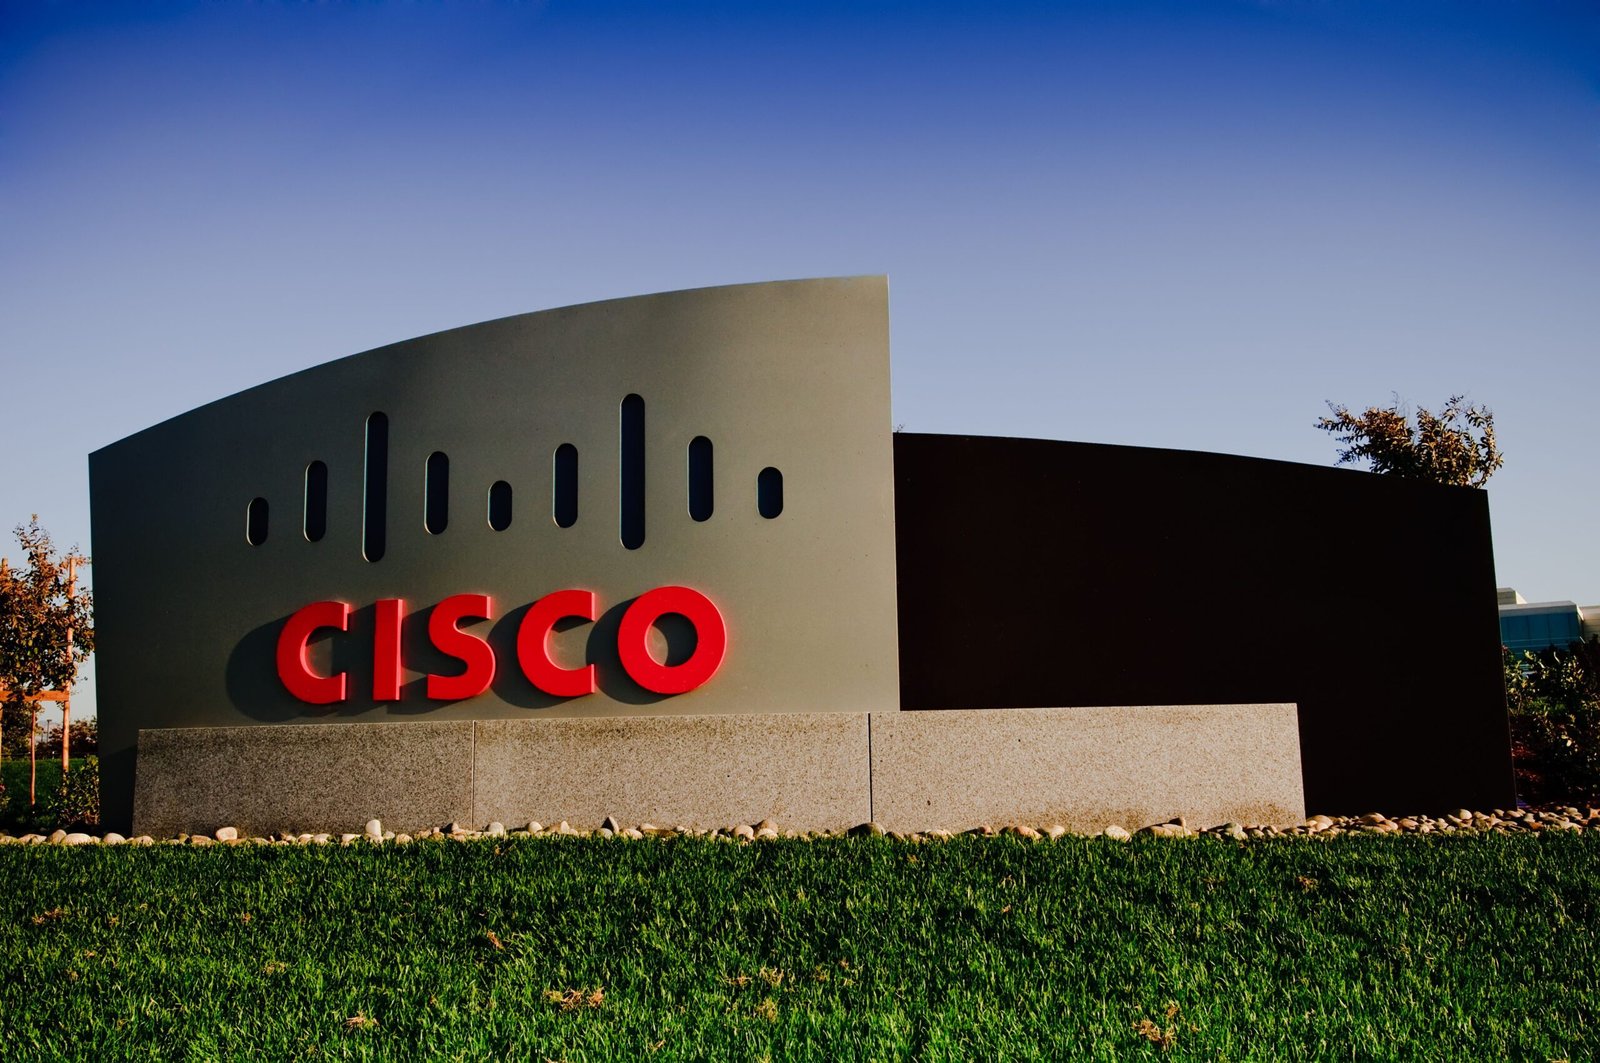 Patchless Cisco Flaw Breaks Cloud Encryption for ACI Traffic – Source: www.darkreading.com